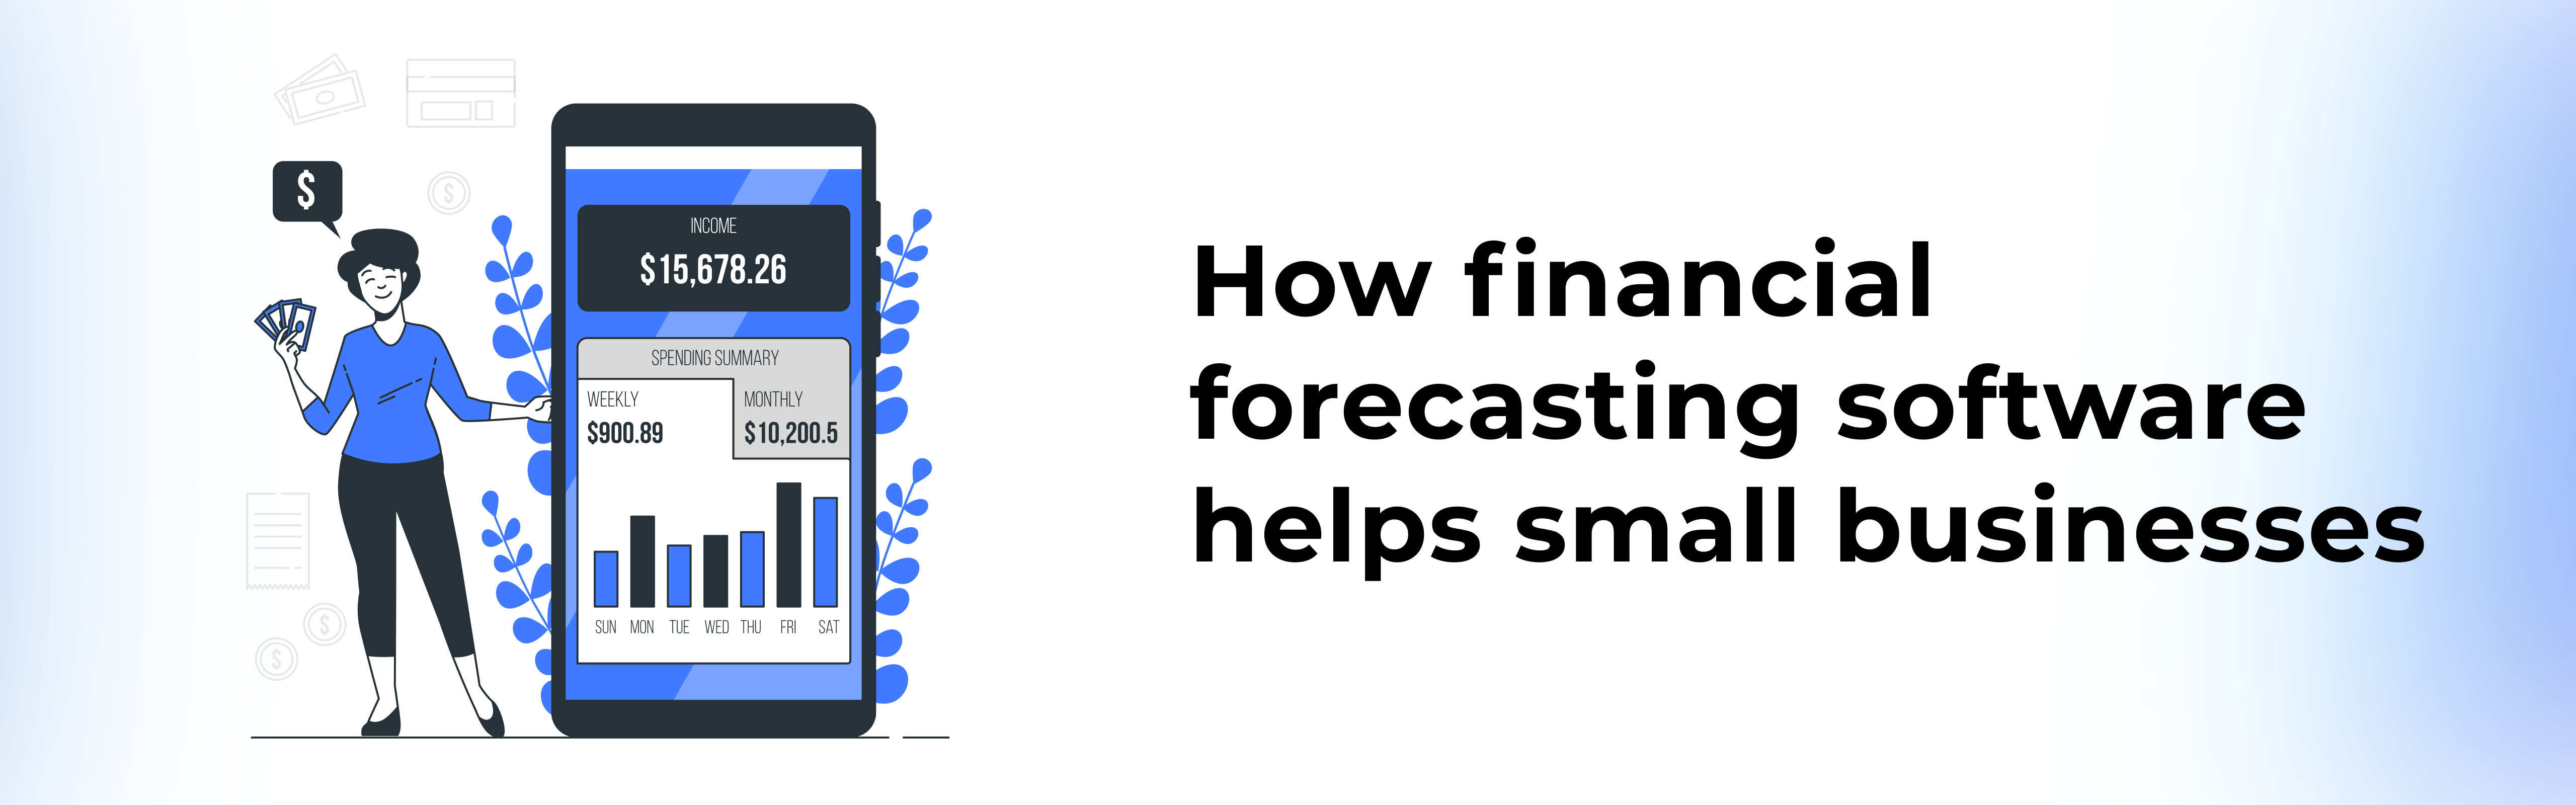 financial-forecasting-software-helps-small-business